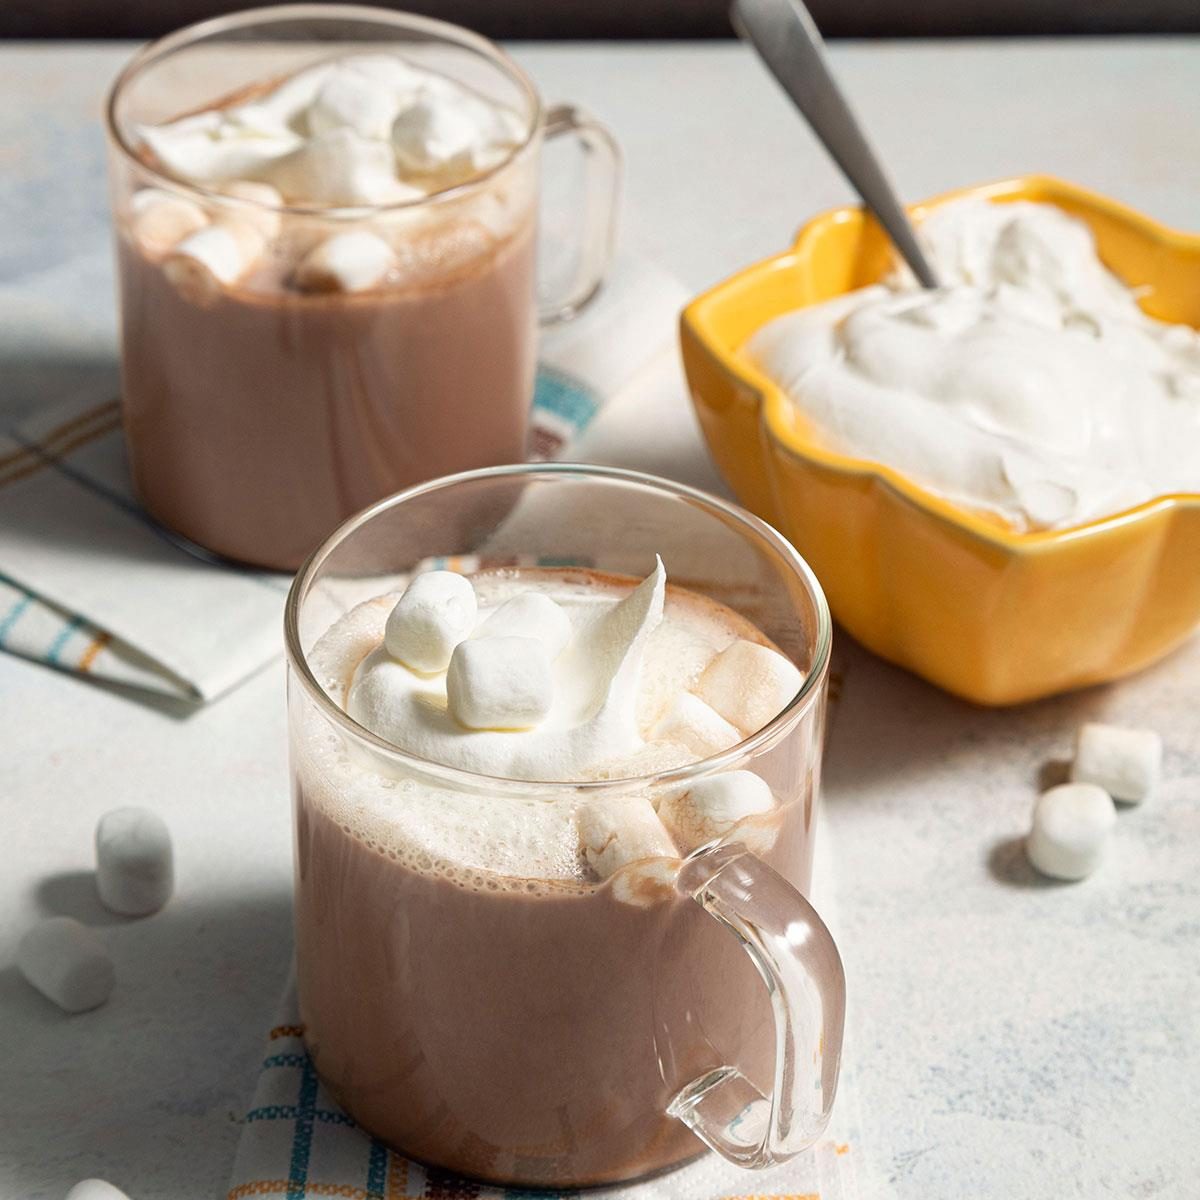 Homemade Hot Cocoa Exps Ft24 4205 St 0305 2 1